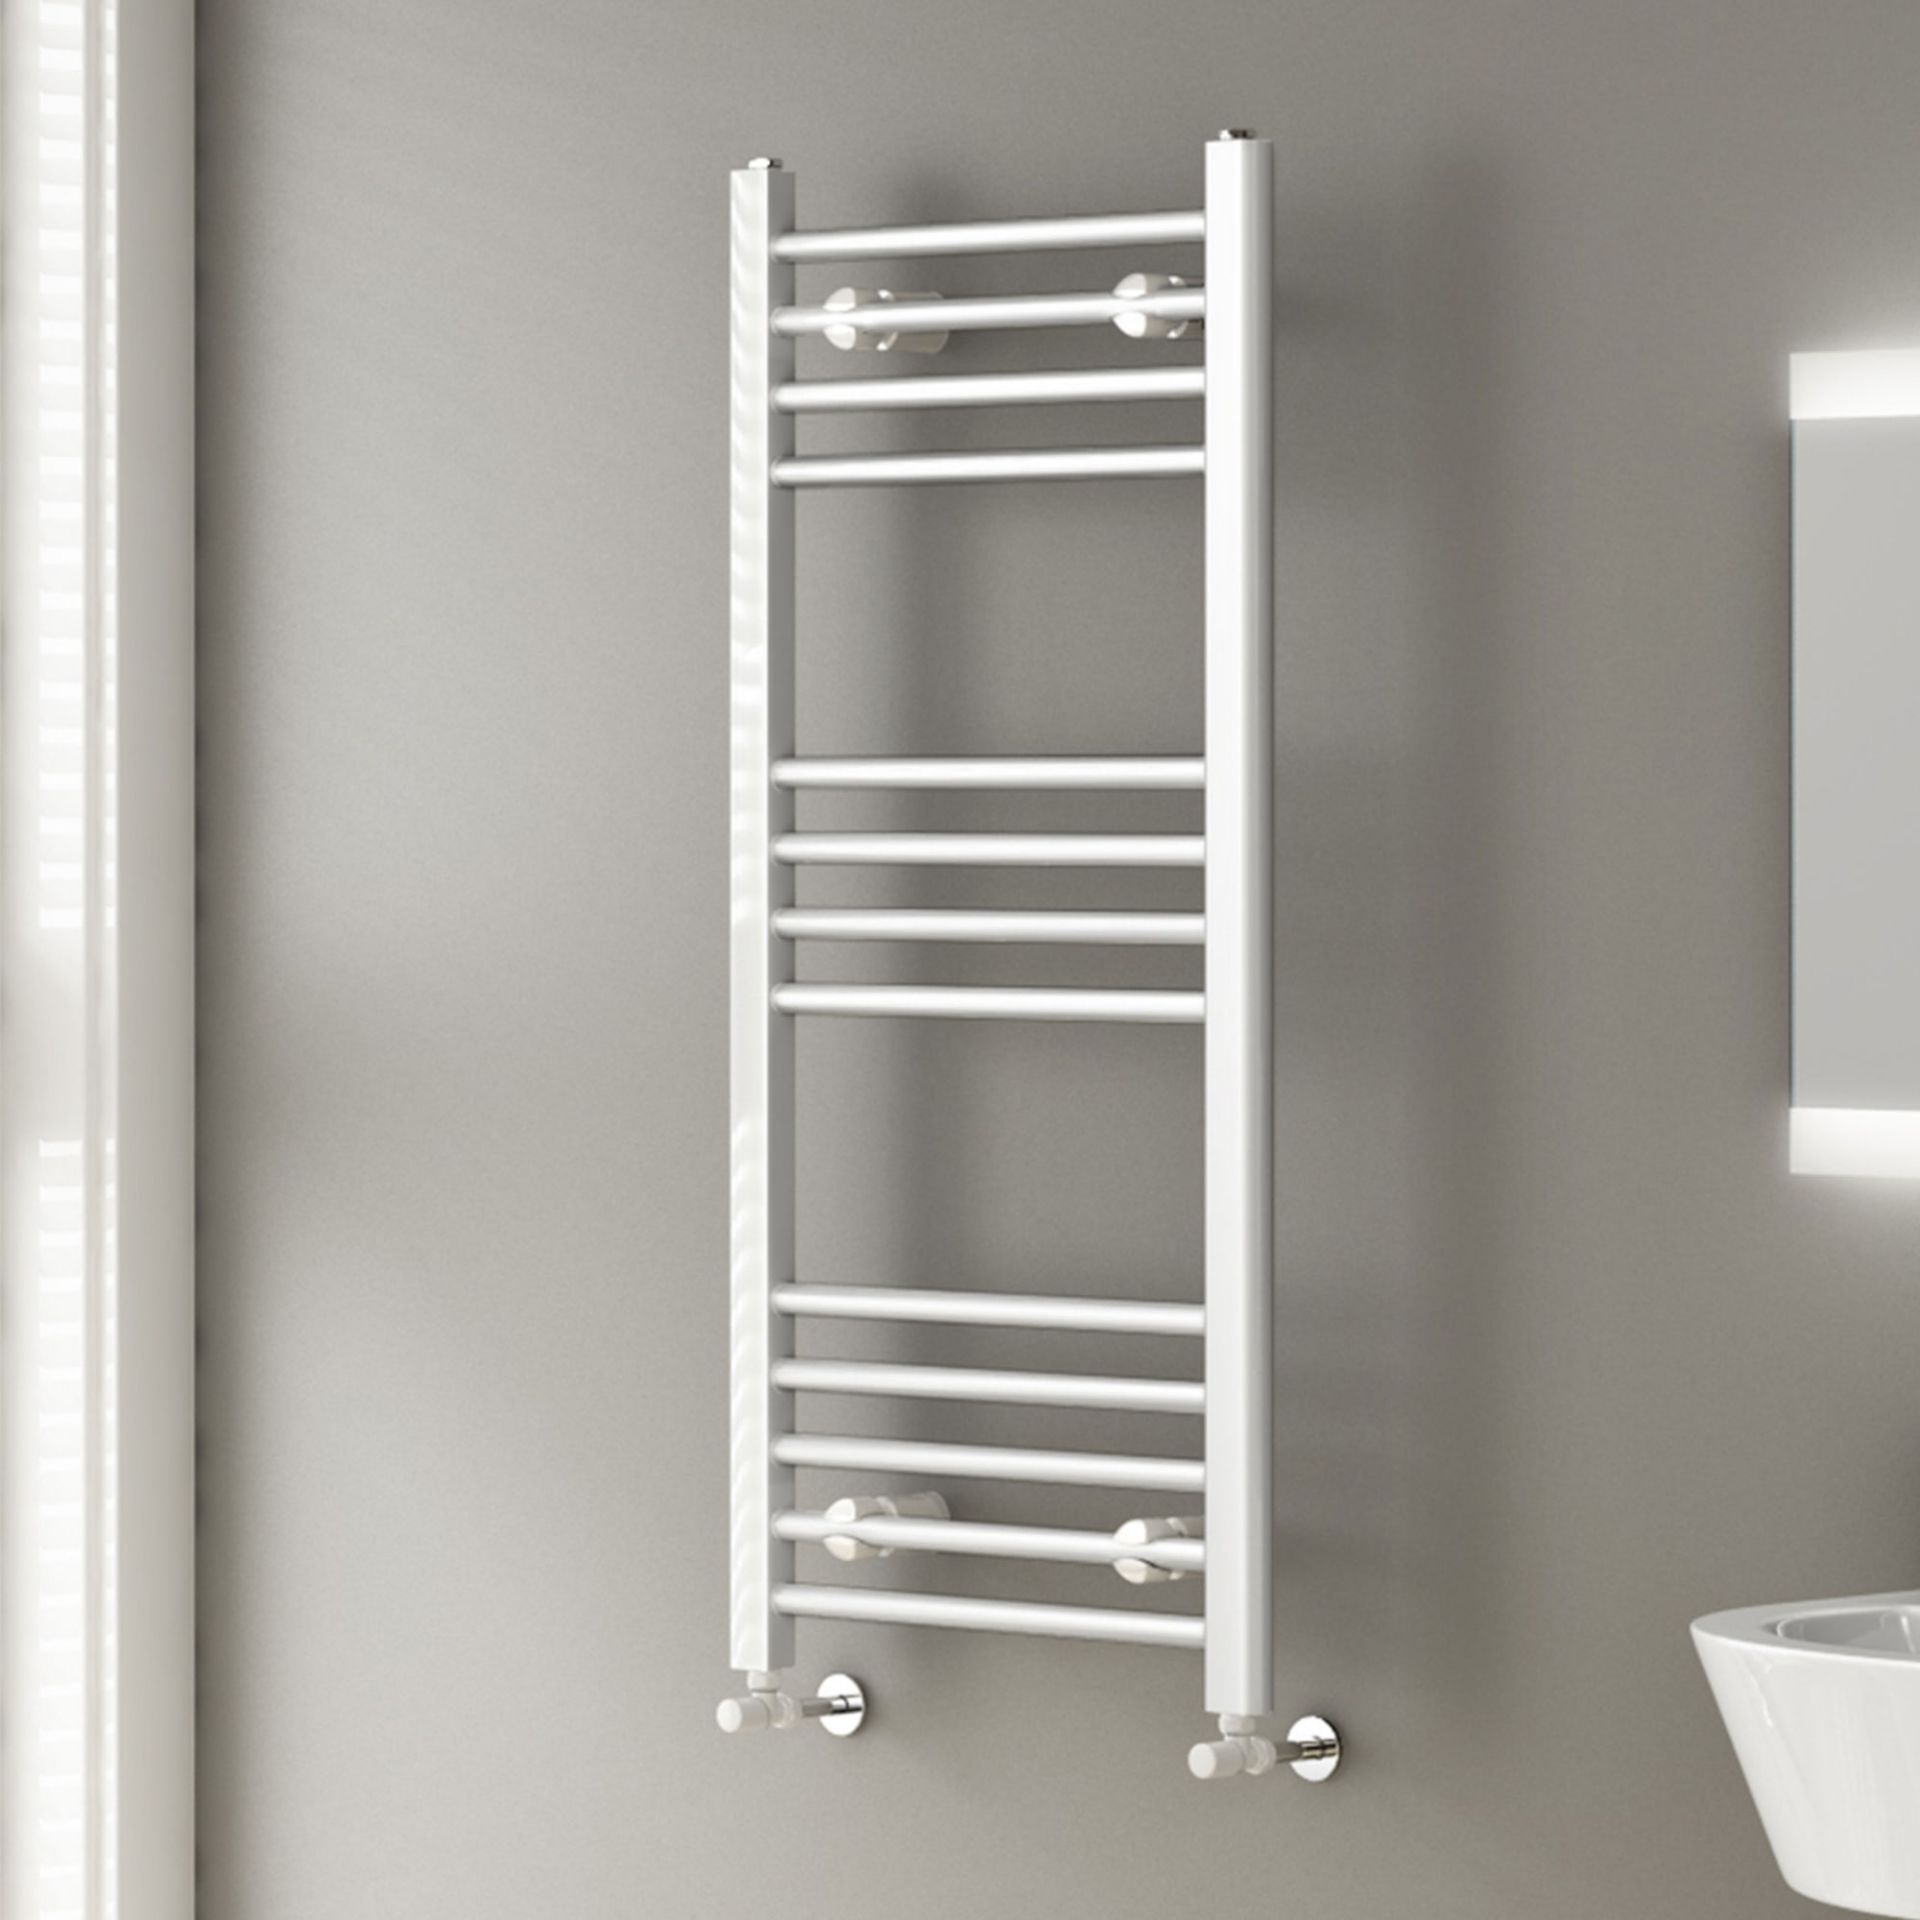 (TT120) 800x450mm White Straight Rail Ladder Towel Radiator. RRP £249.99. Made from low carbo...